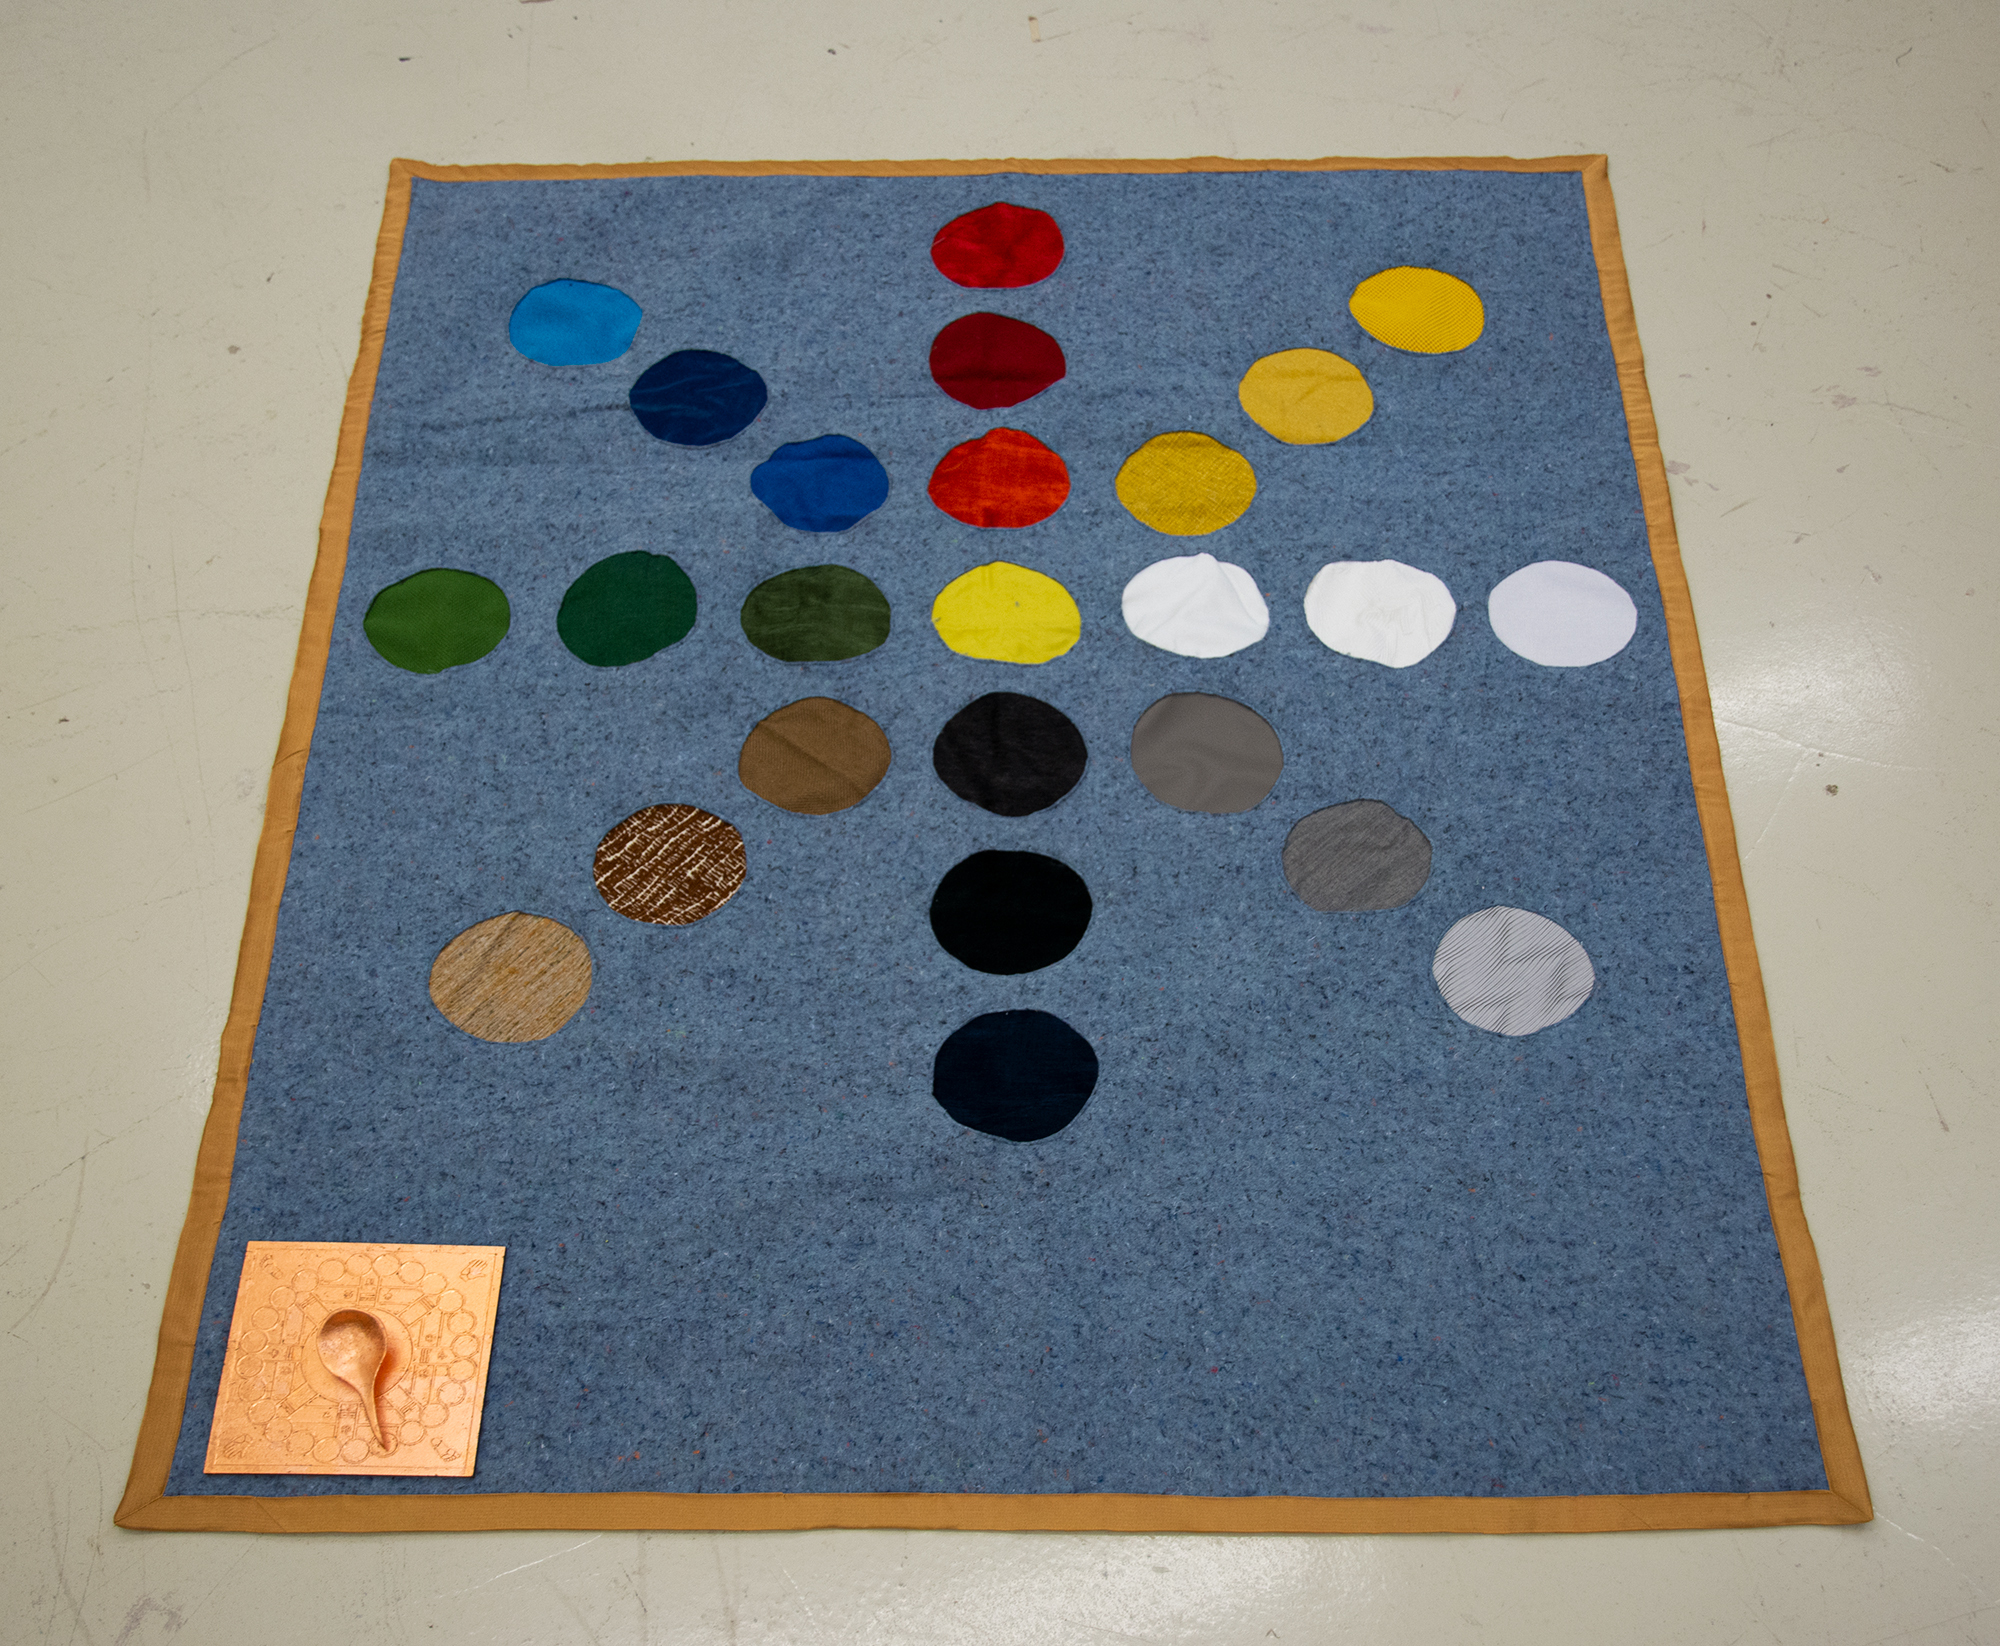 a large mat made of a felt moving blanket. Circles in various colors radiate out evenly spaced from the center.